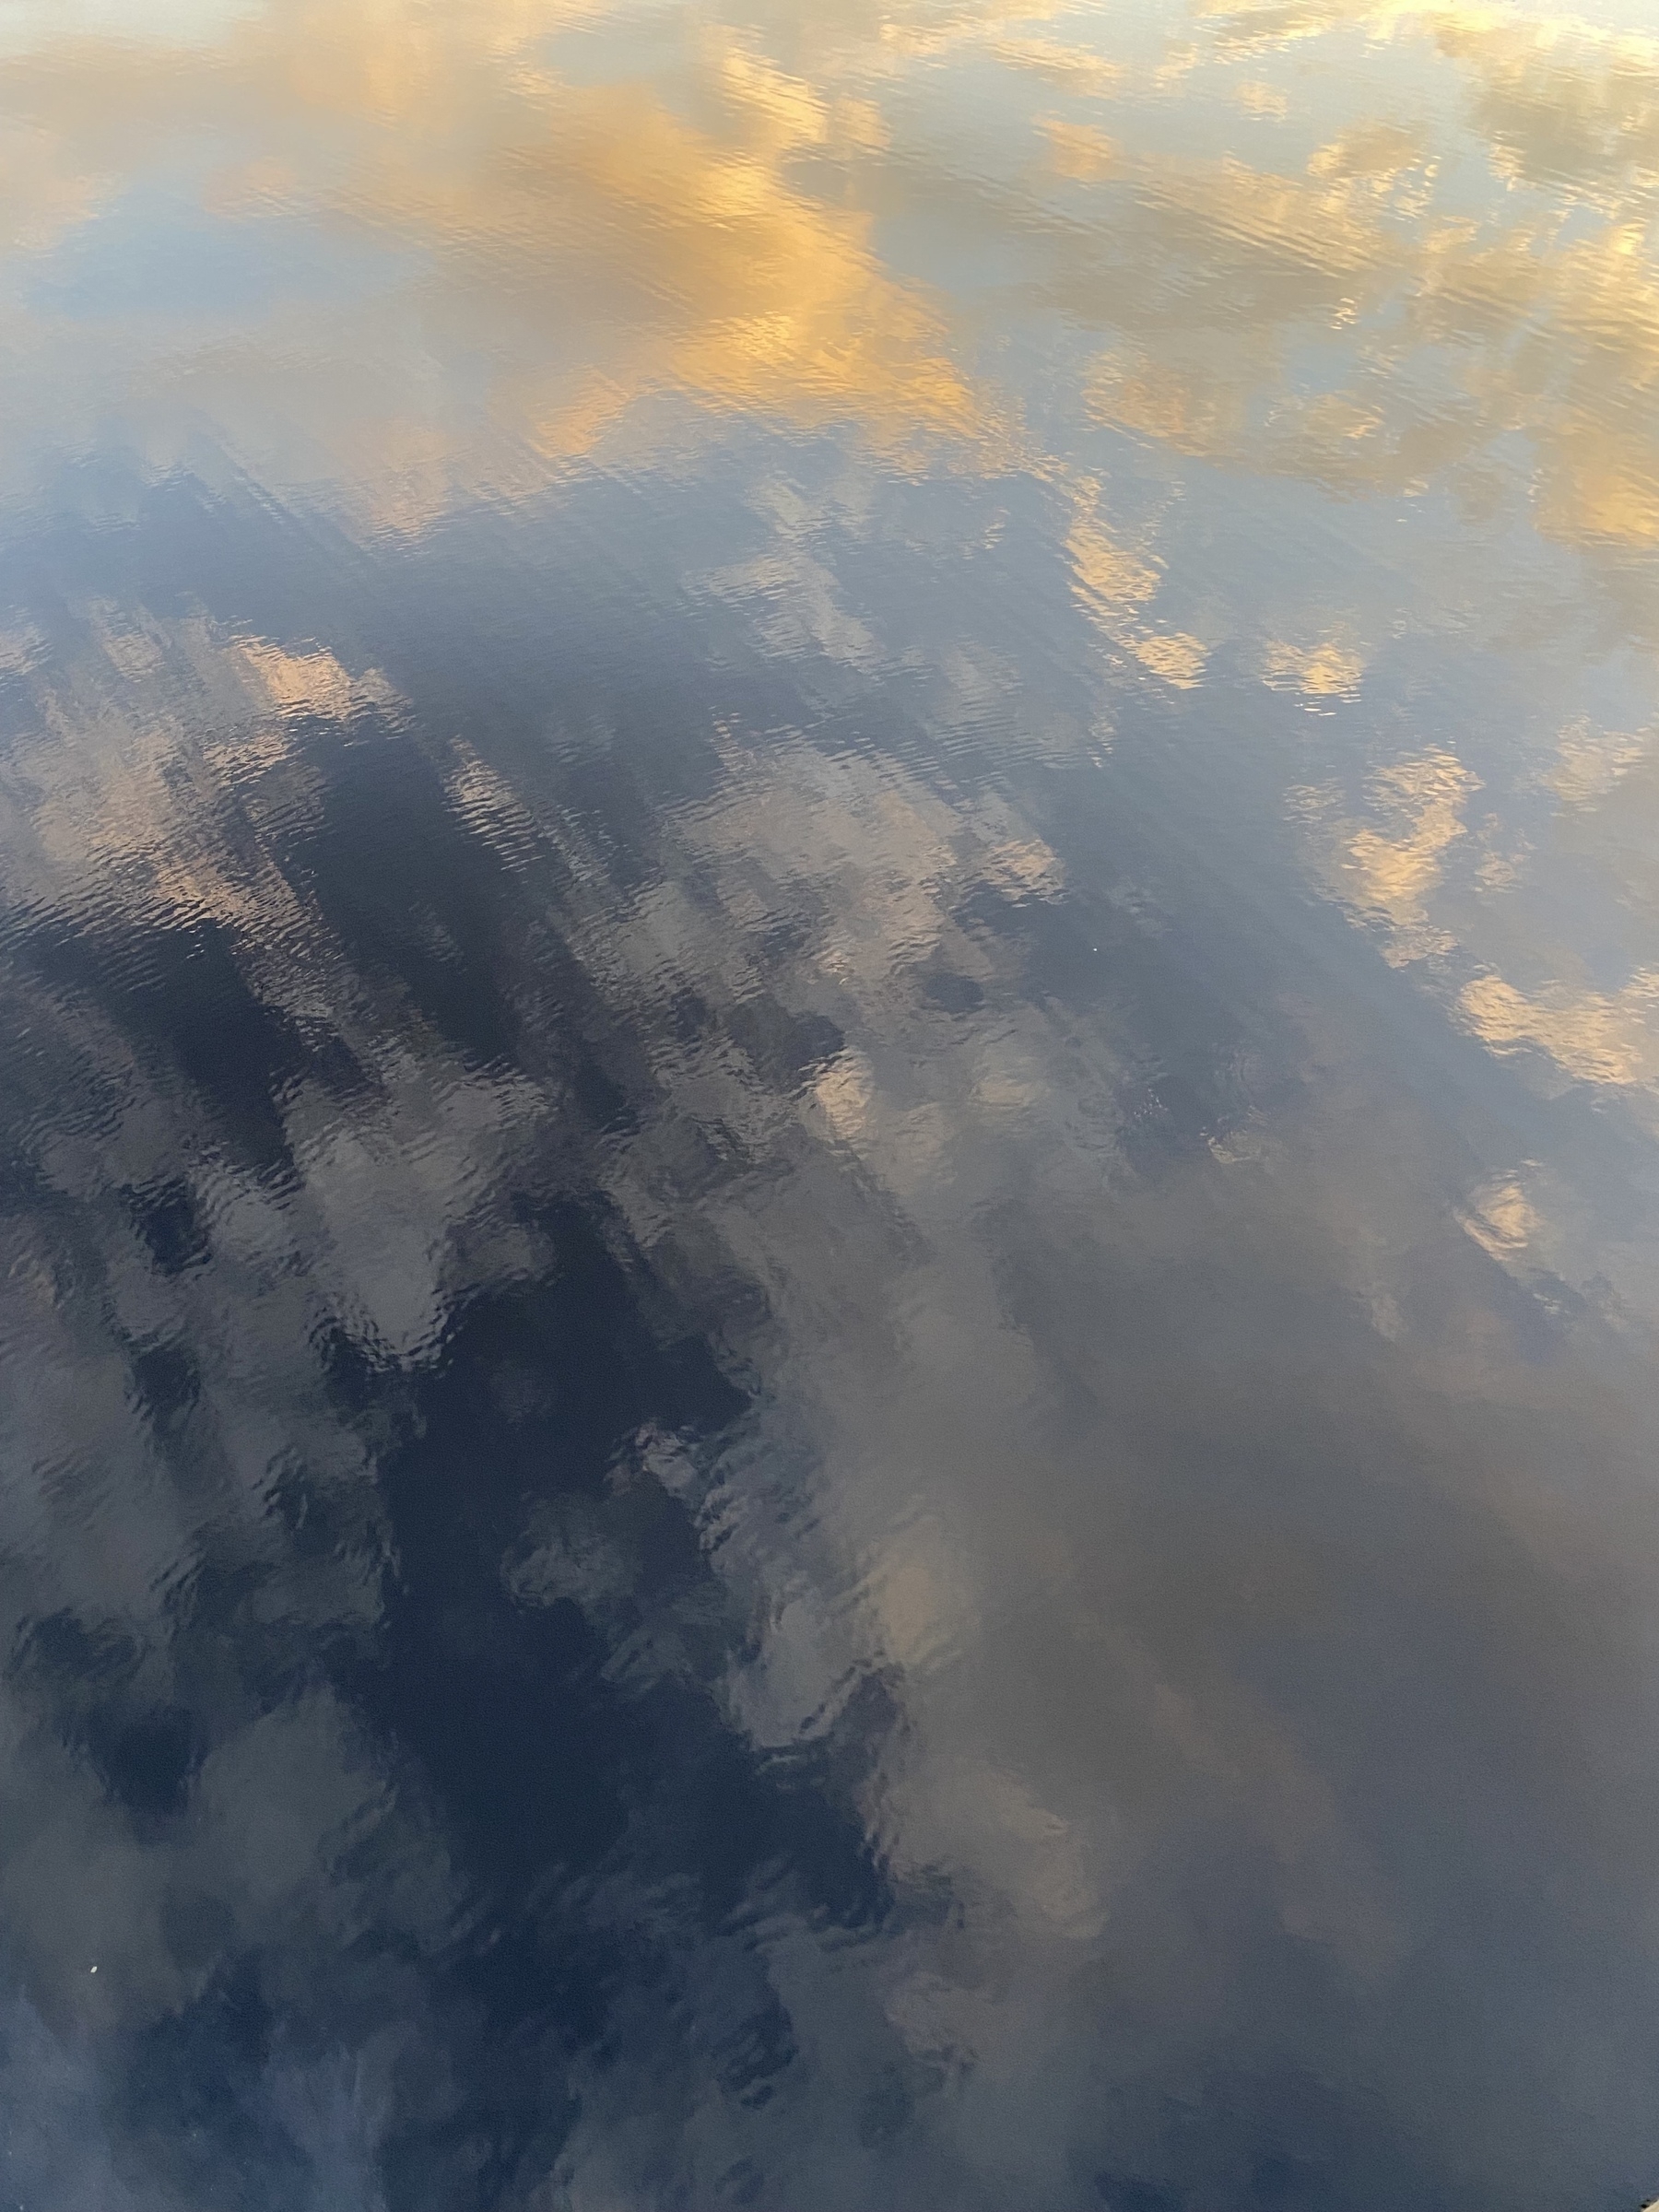 Sunset clouds reflected in rippled water.